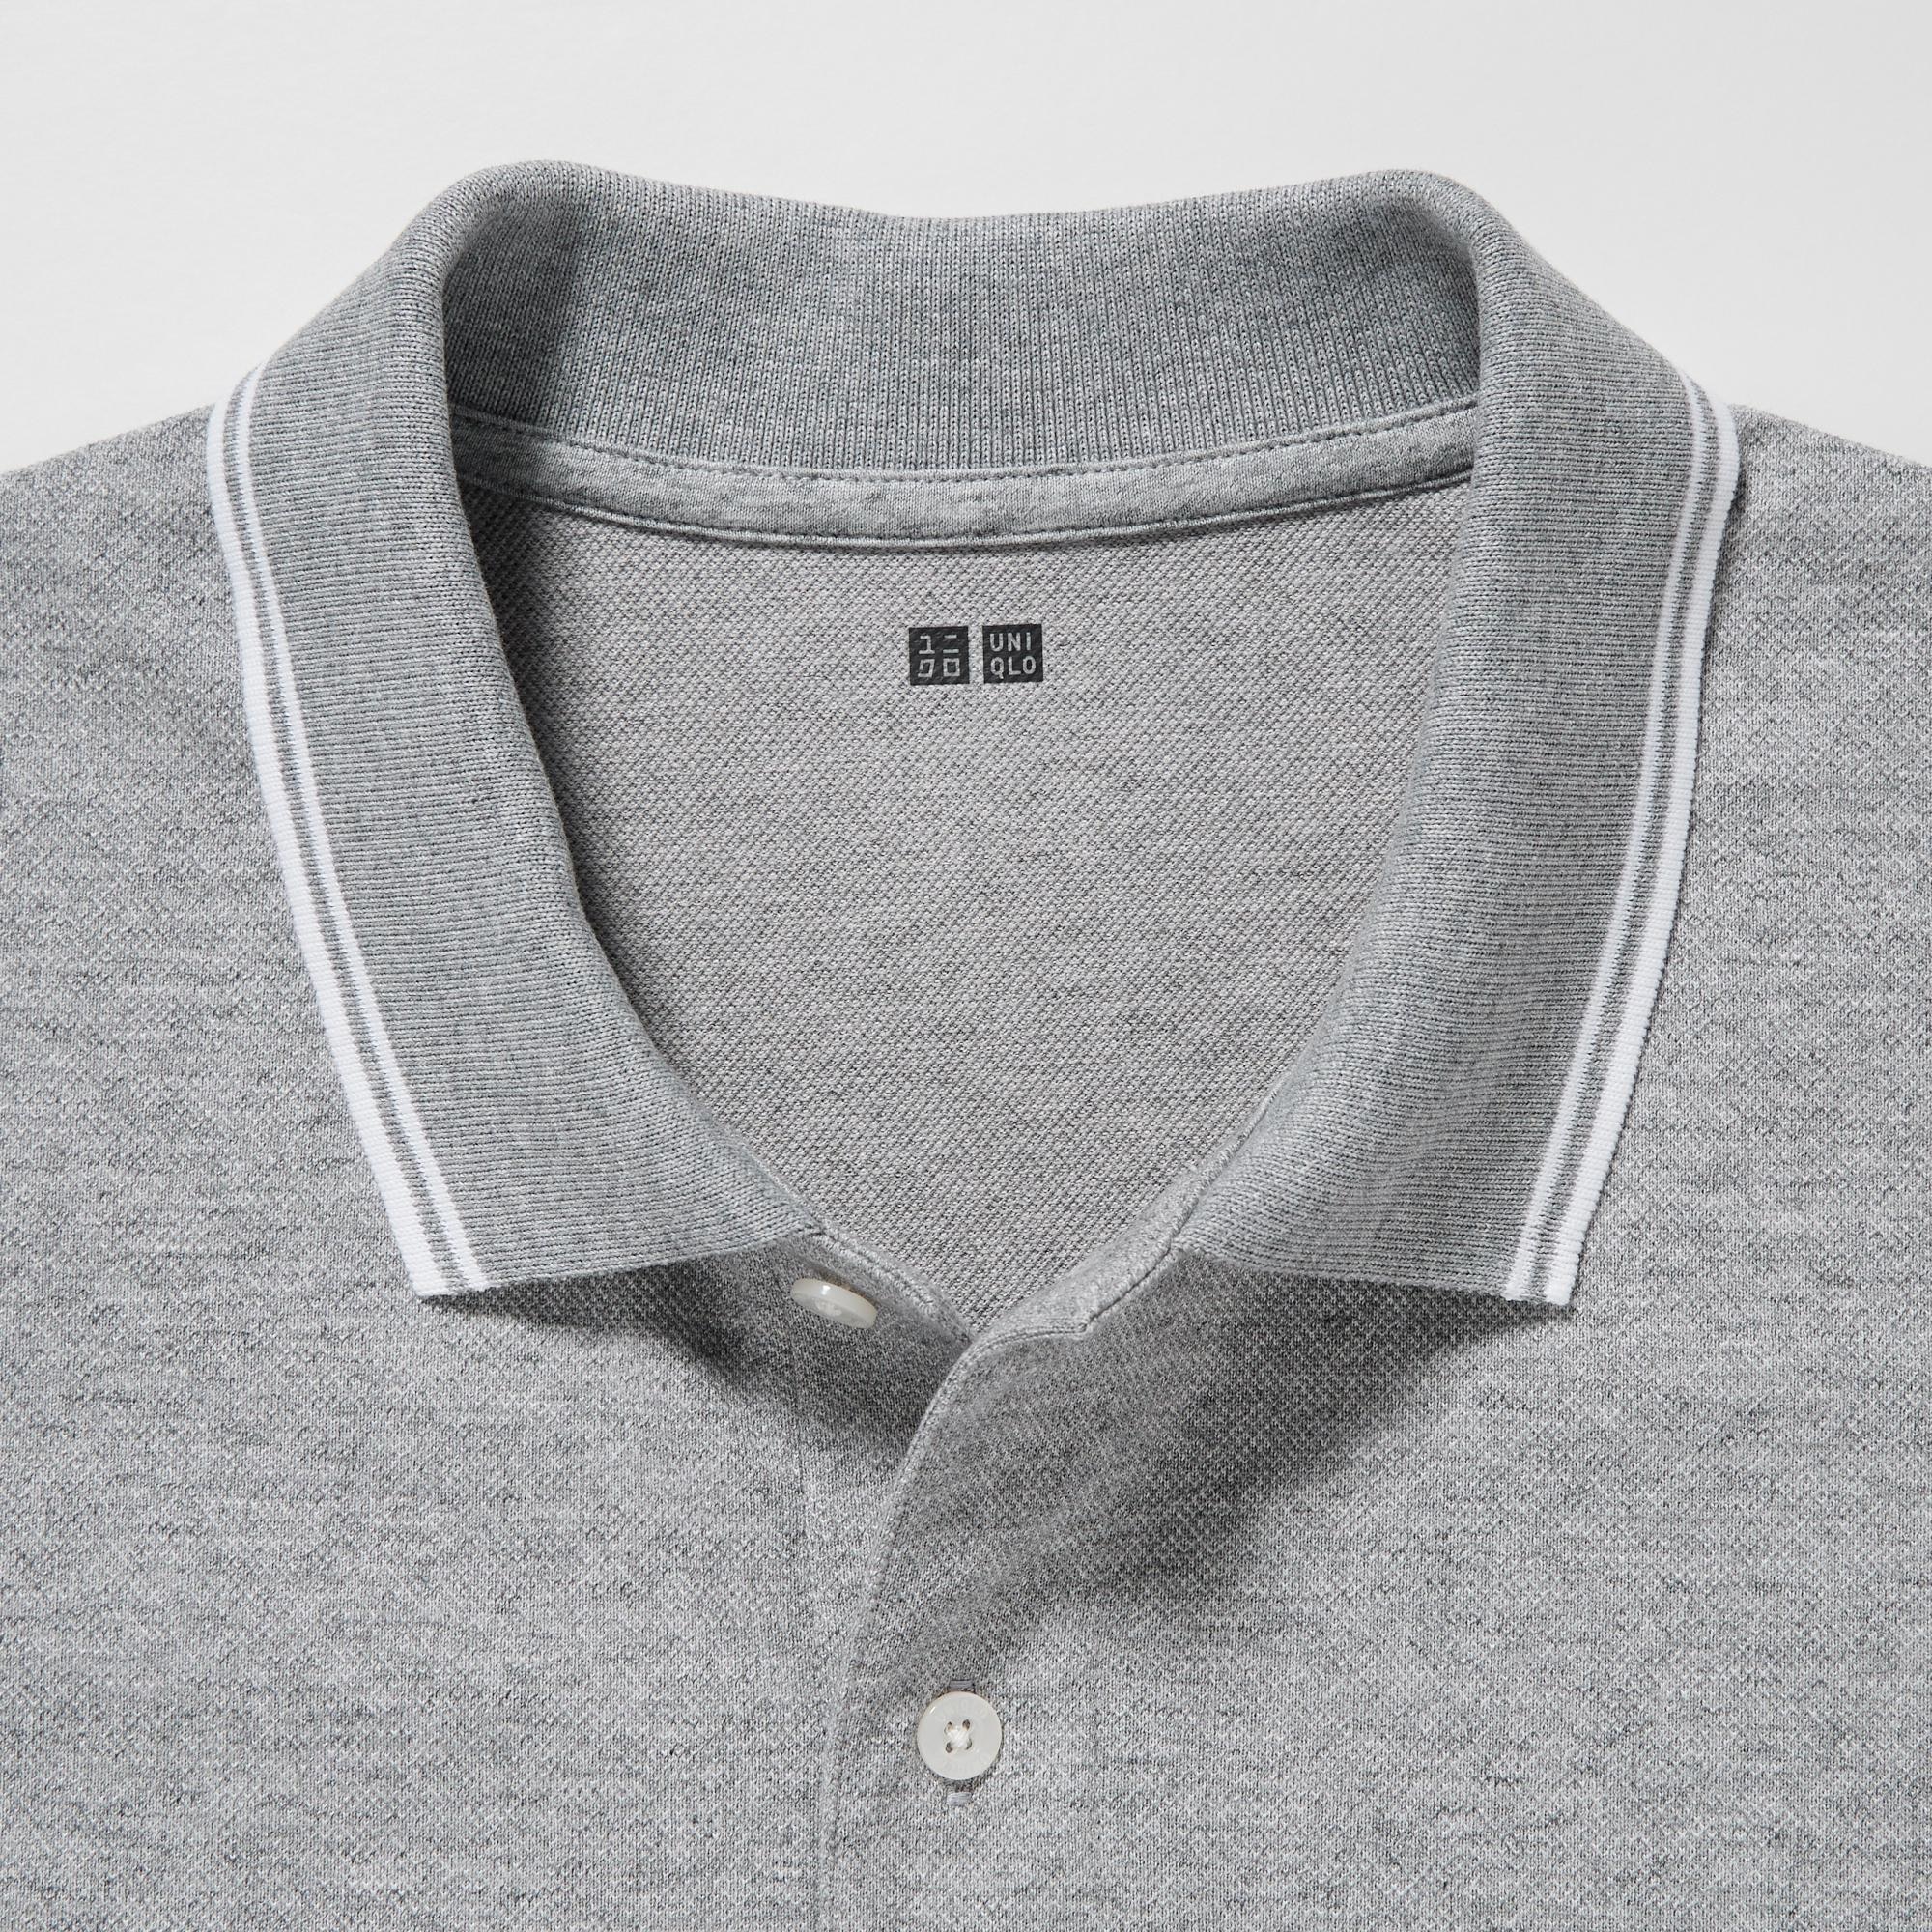 Uniqlo Dry Pique Short Sleeve Polo Shirt  Grey  Online Sneaker Store